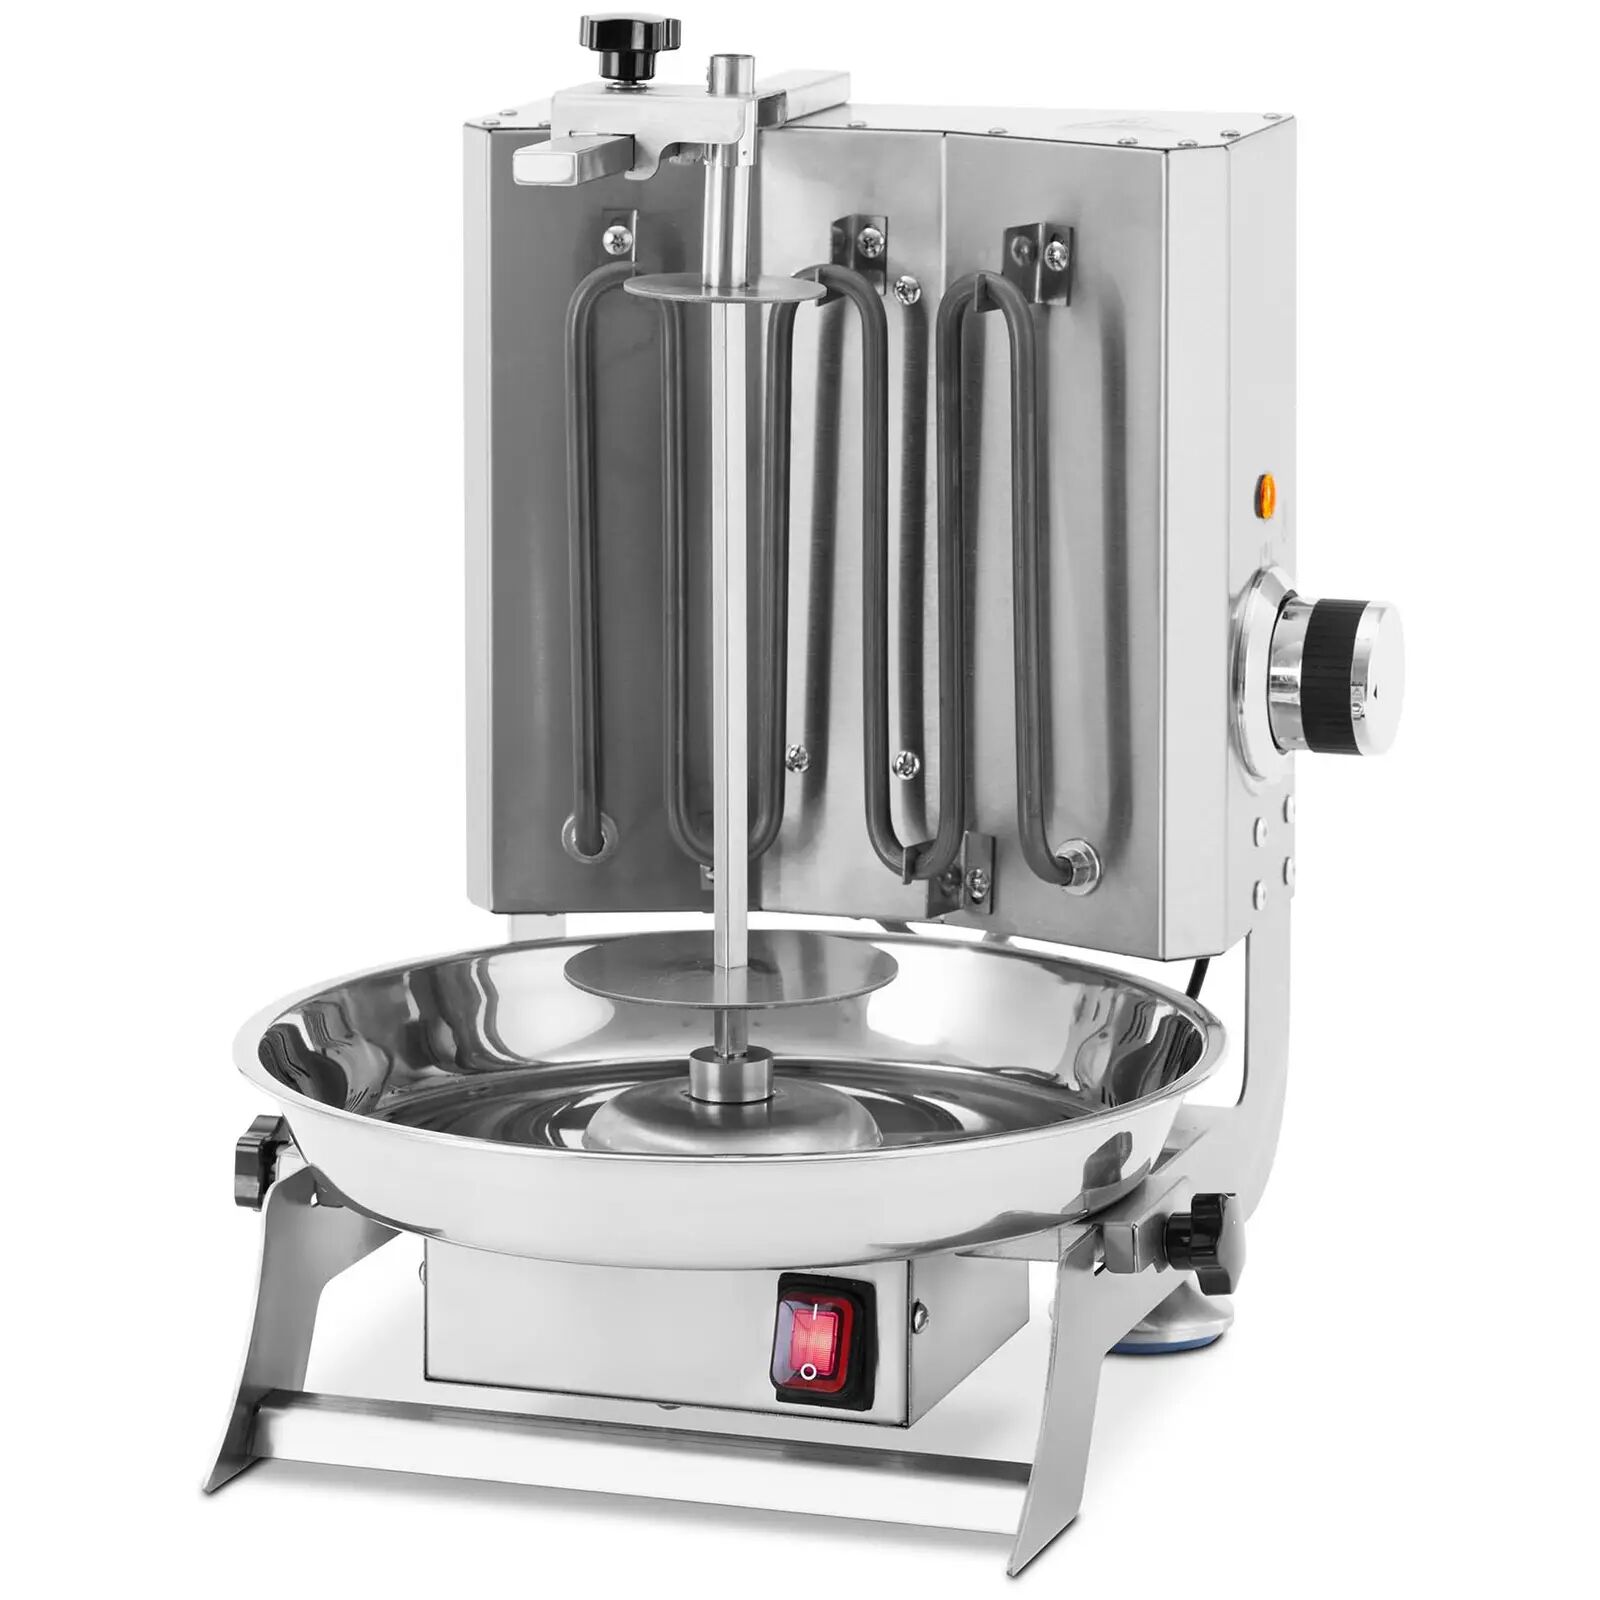 Schwarma grill - 2000 W - up to 15 kg meat - Royal Catering RCEK-46